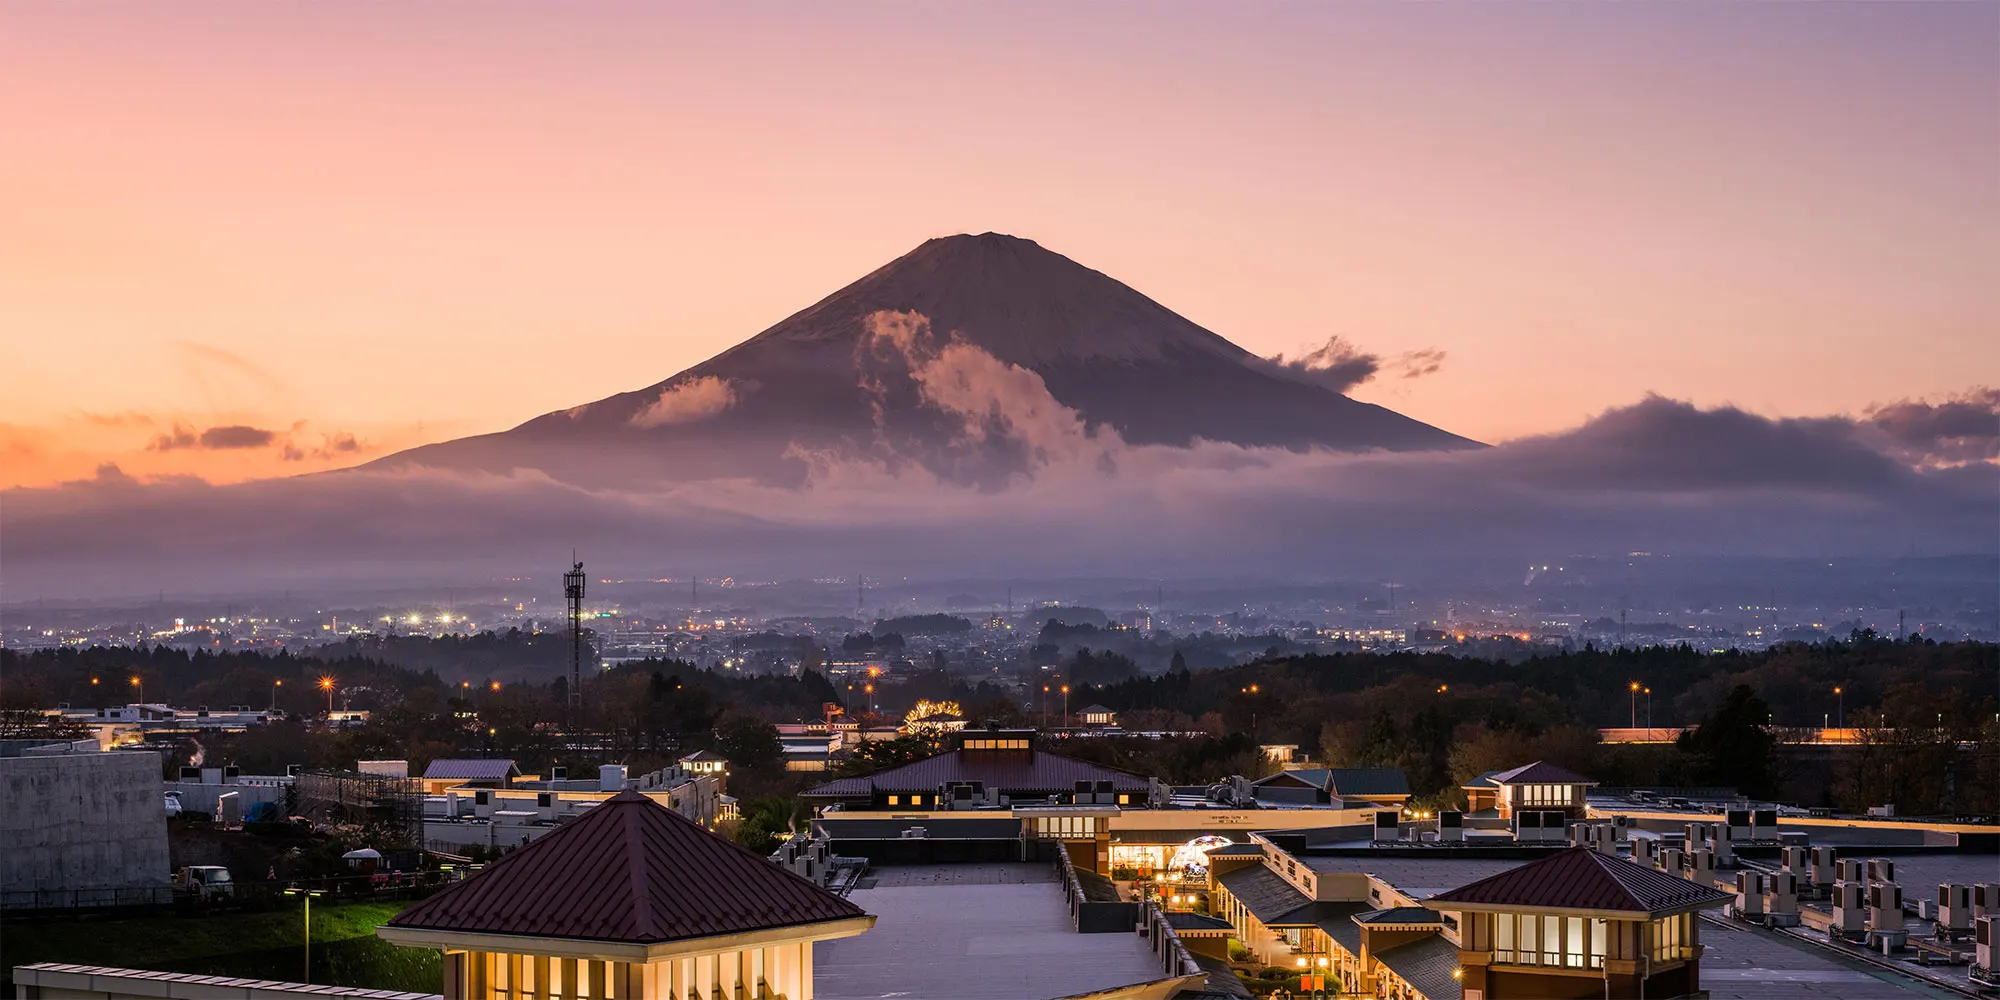 Gotemba Premium Outlets and Mt.Fuji